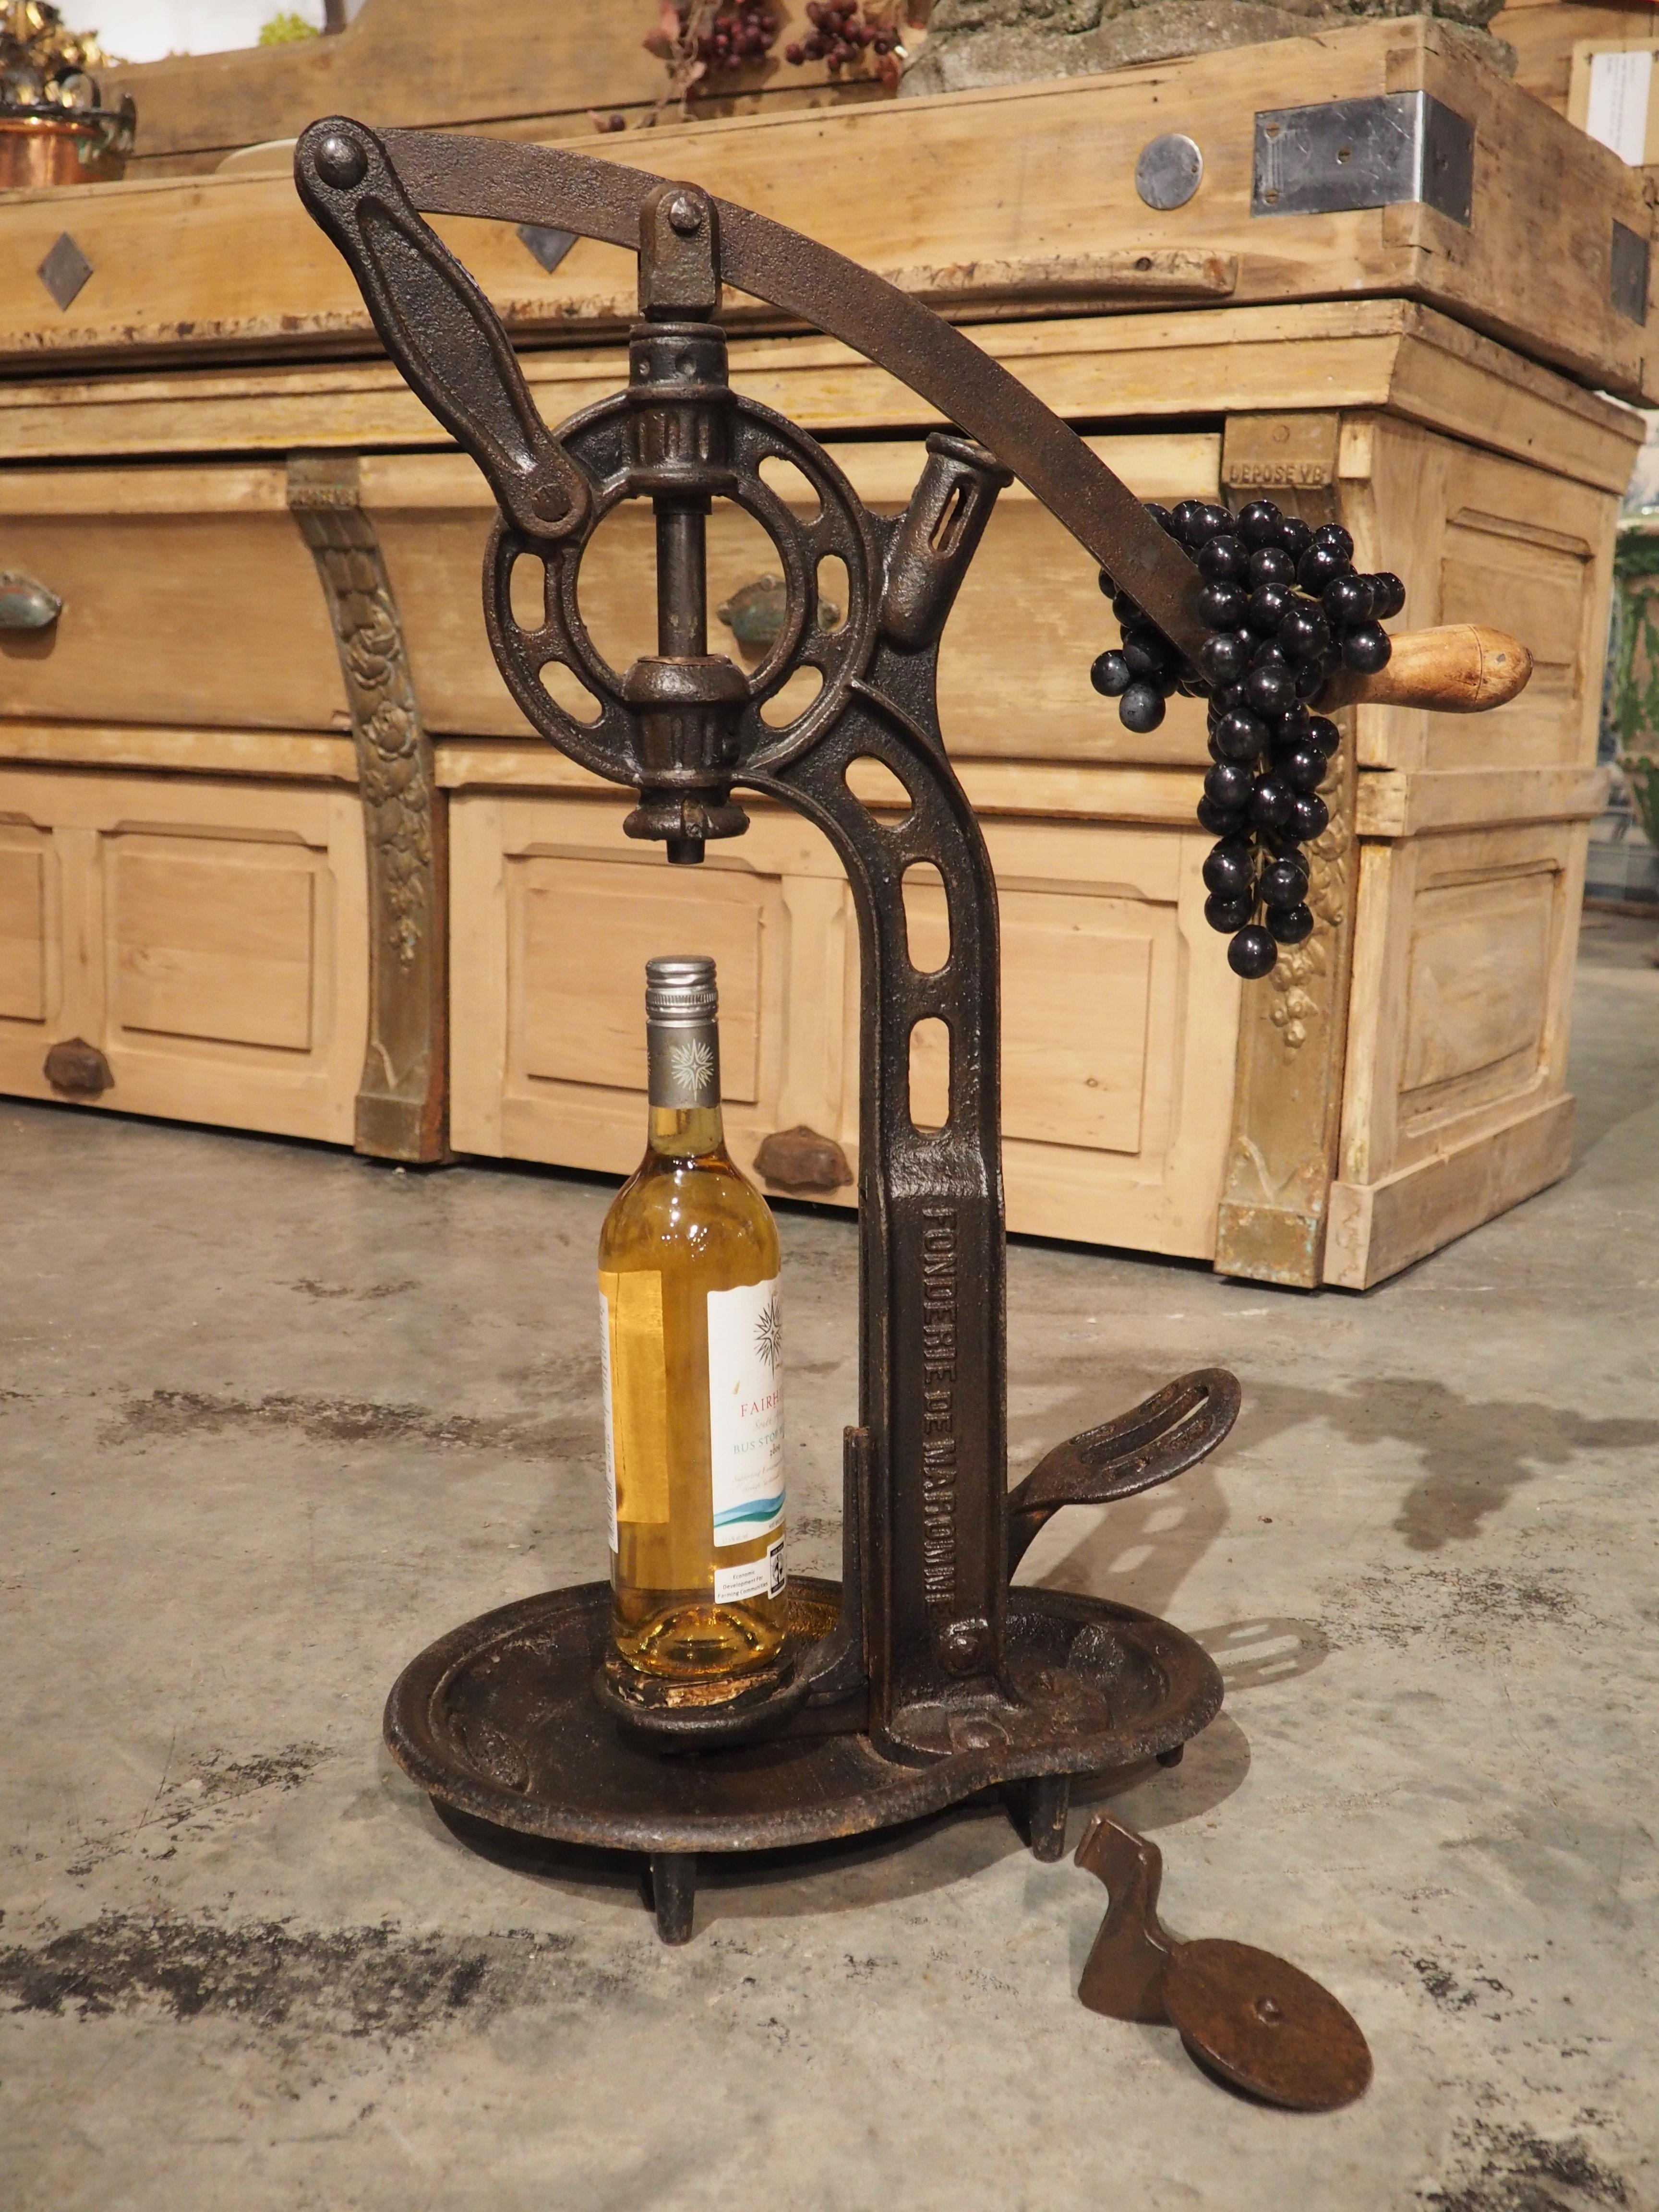 Known as a bouchonneuse, this French cast iron wine bottle corker would have been used at a vineyard in Normandy to seal wine bottles before the advent of mass production methods. Our model, which is from circa 1910, stands 26 3/4 inches tall and